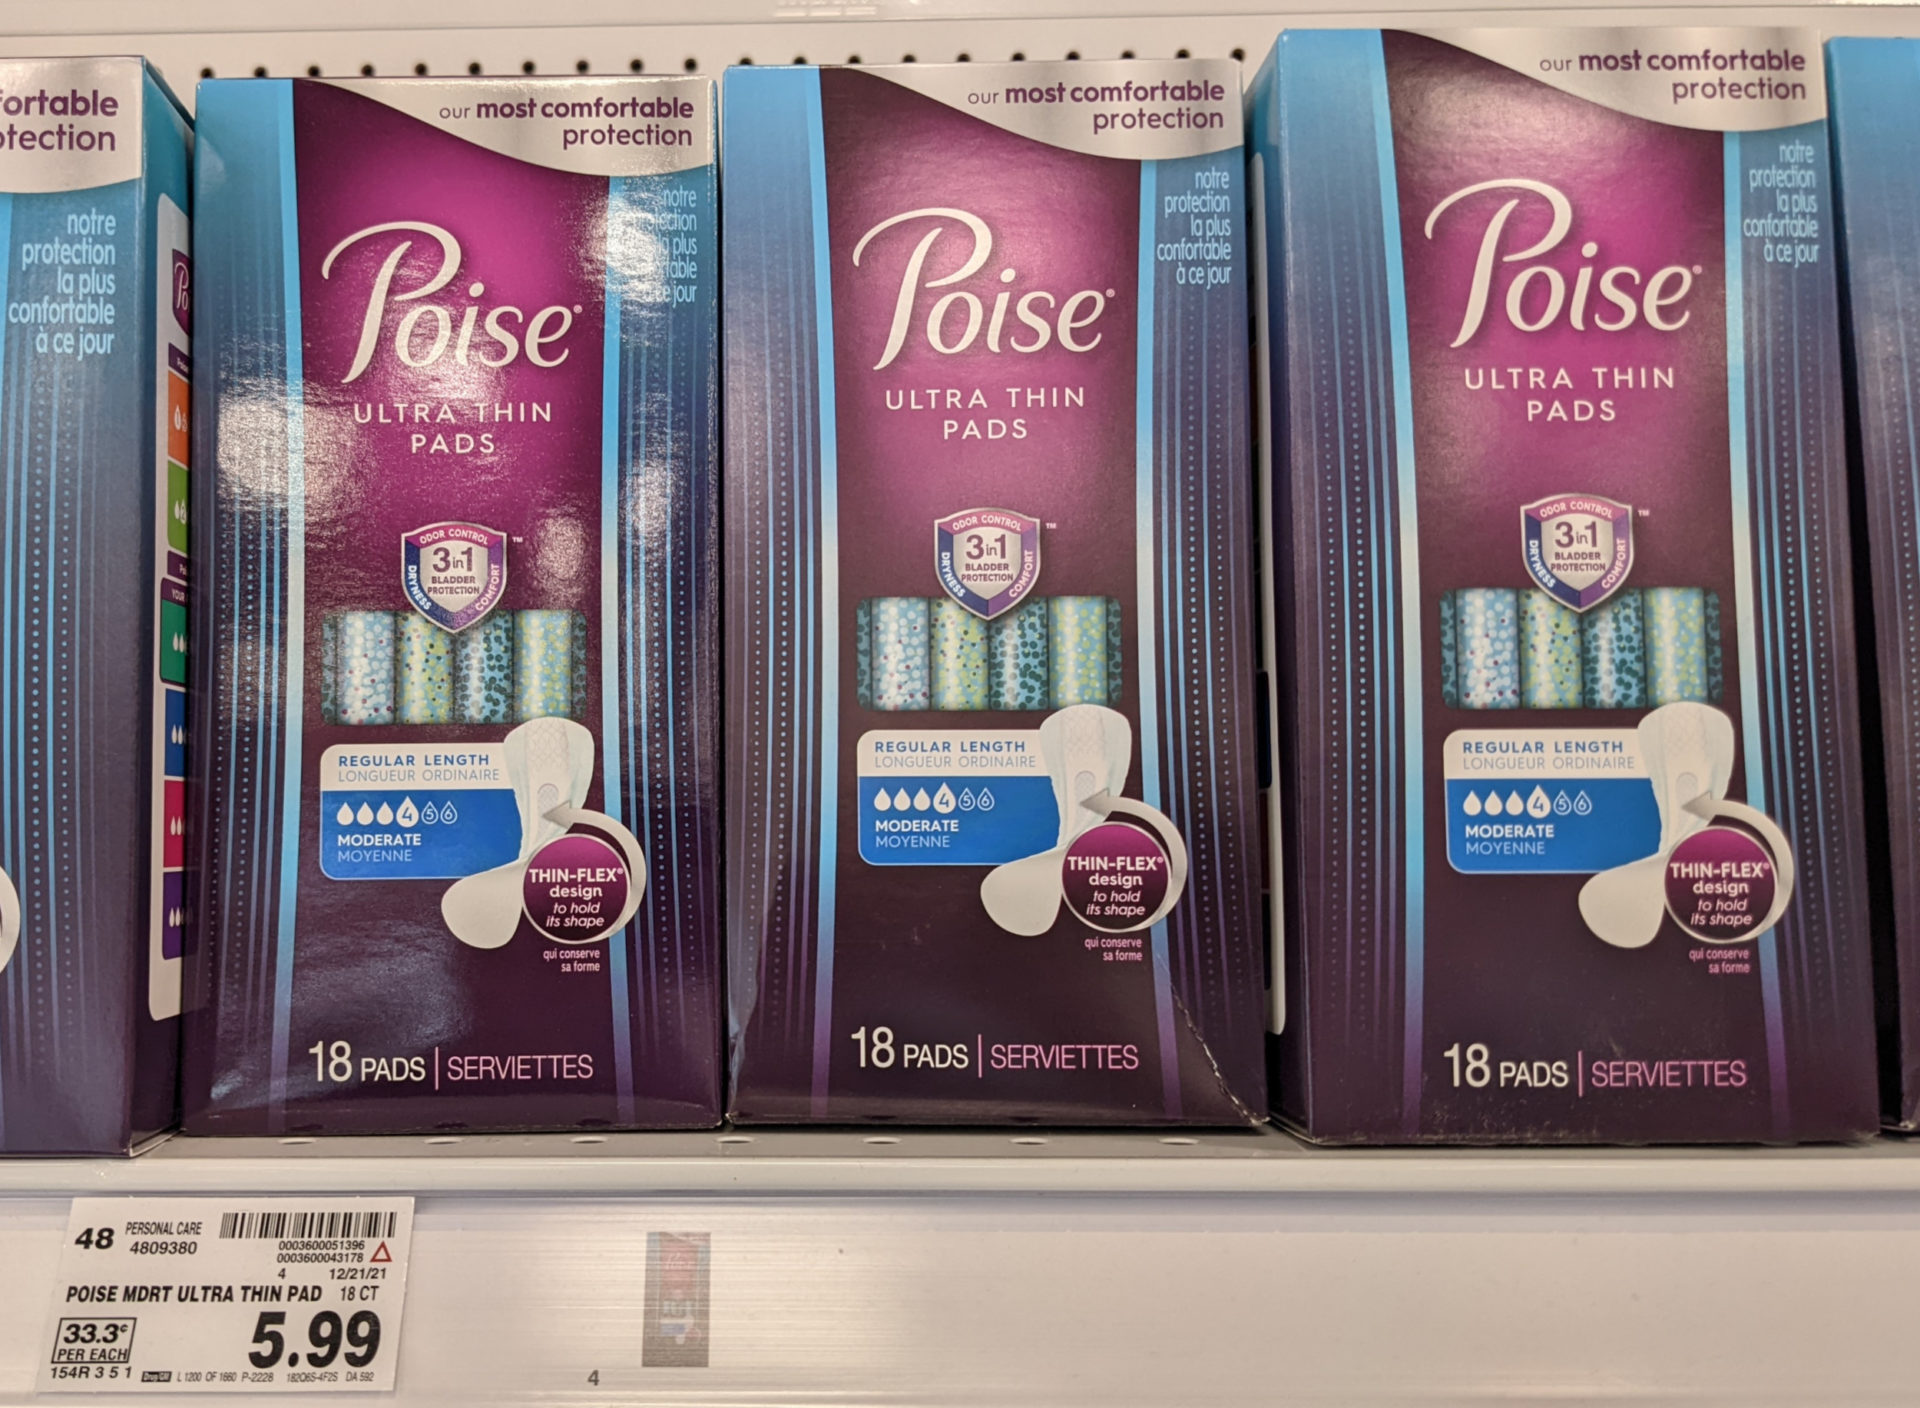 Get Poise Ultra Thin Pads For Just $2.99 At Kroger